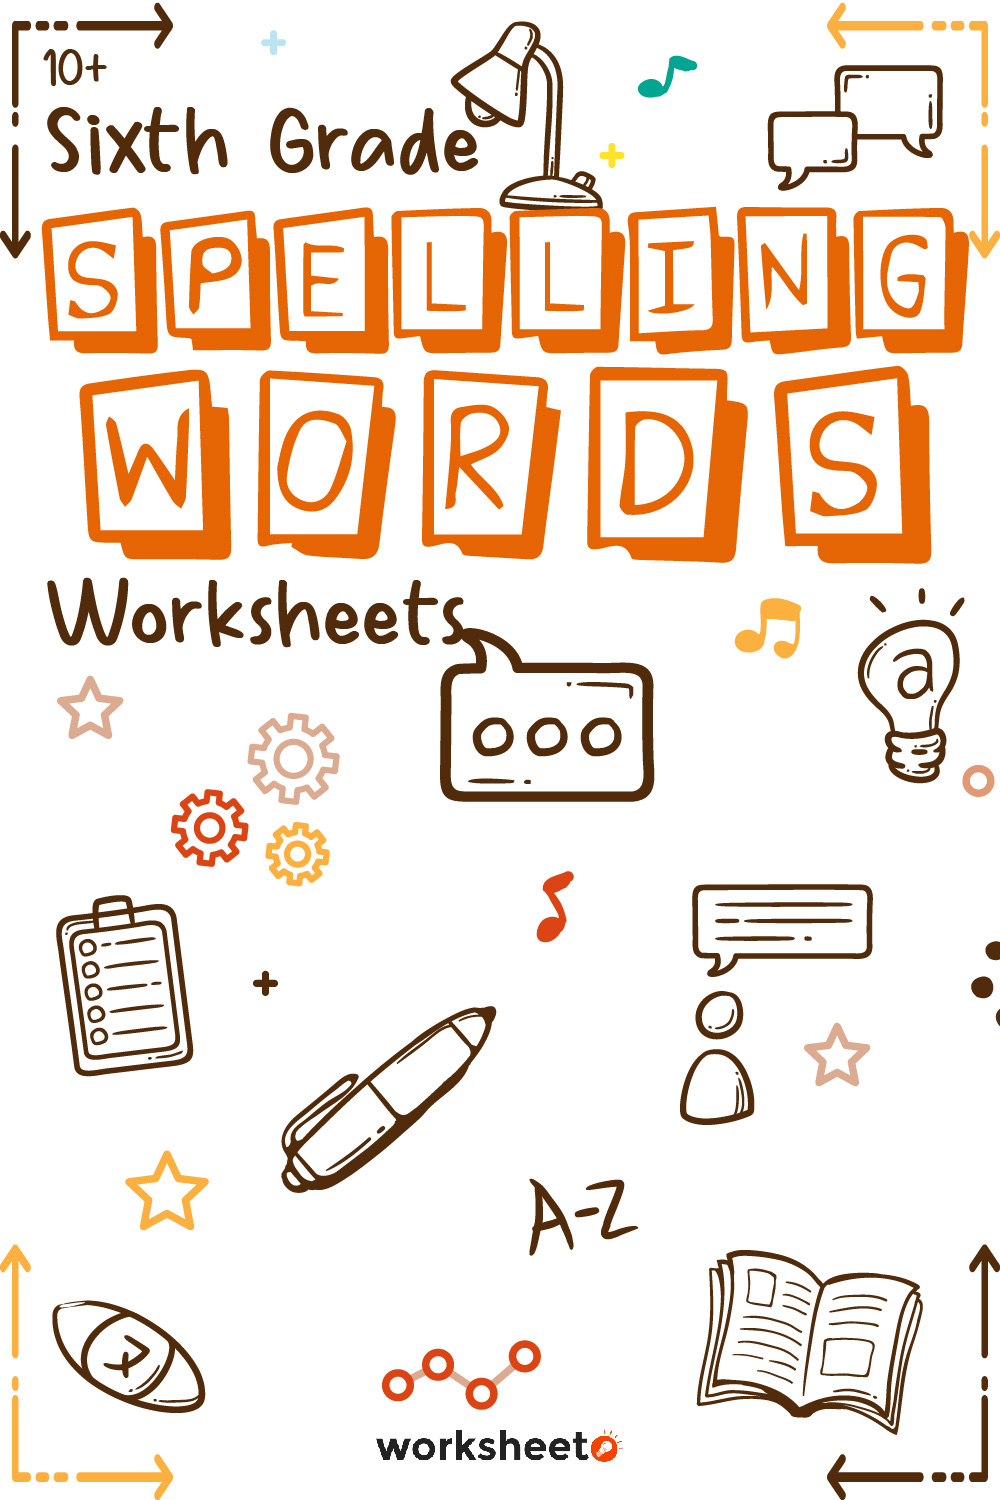 17 Images of Sixth Grade Spelling Words Worksheets